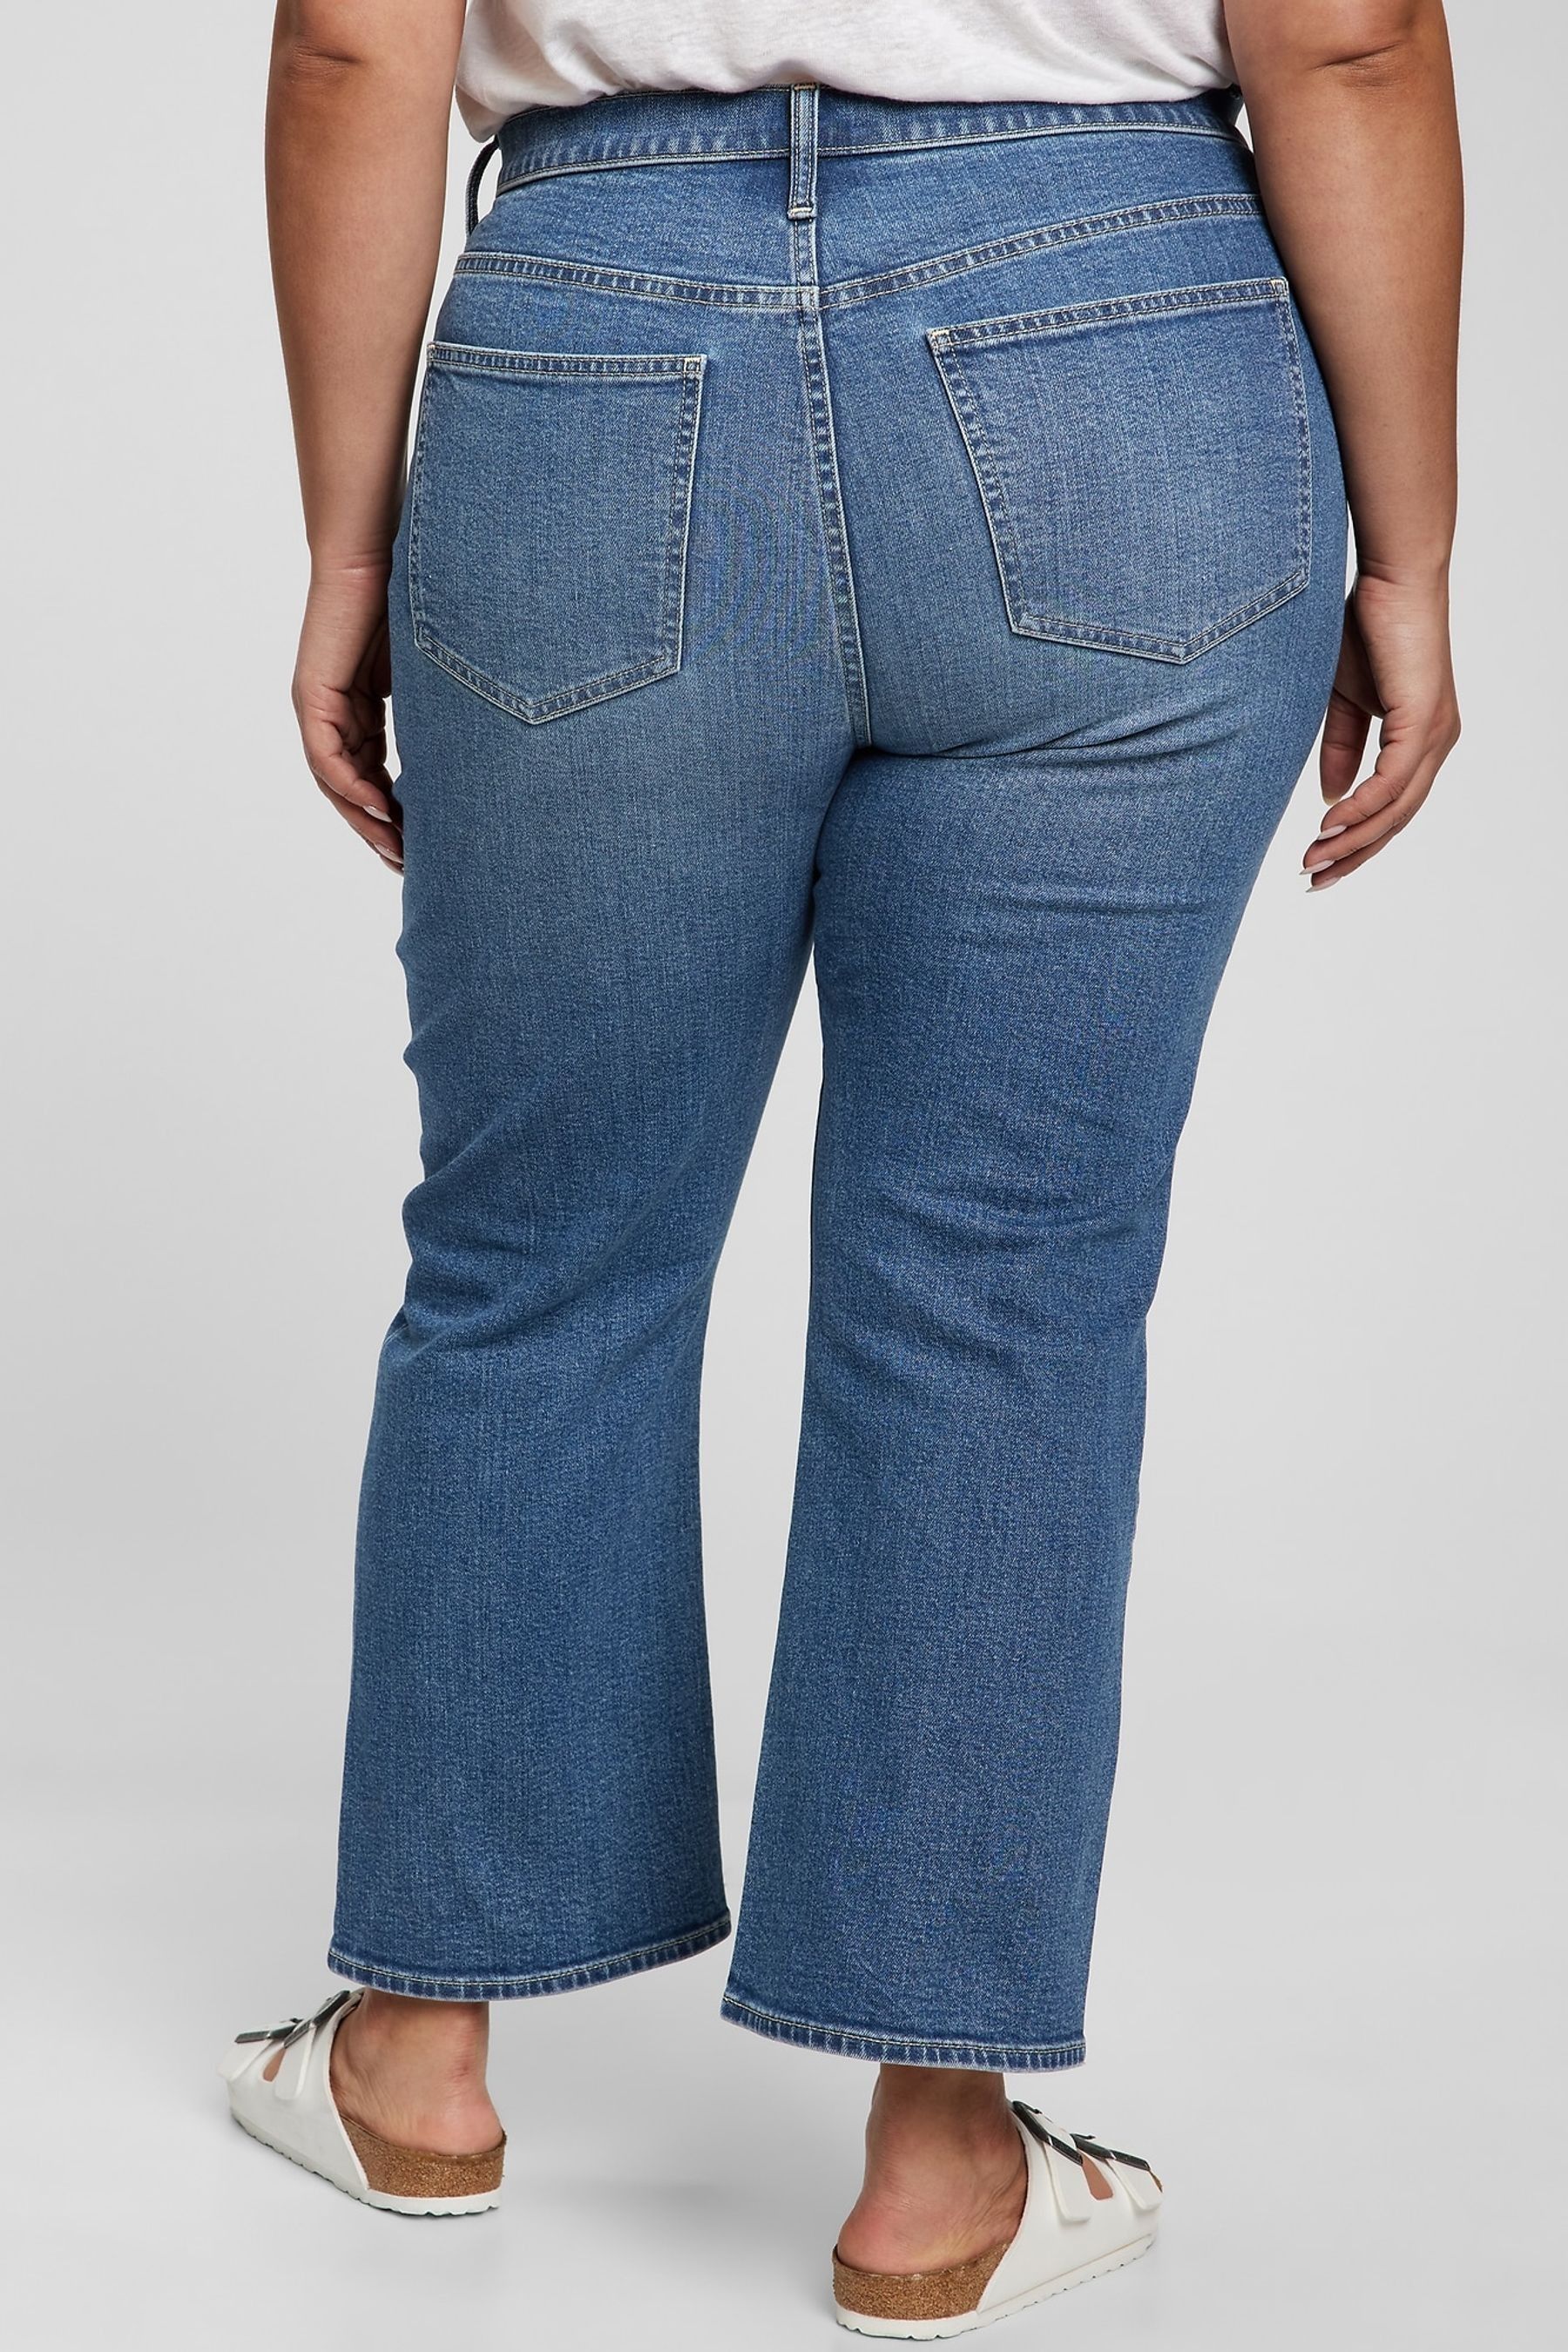 Buy Gap High Waisted Kick Fit Jeans from the Gap online shop